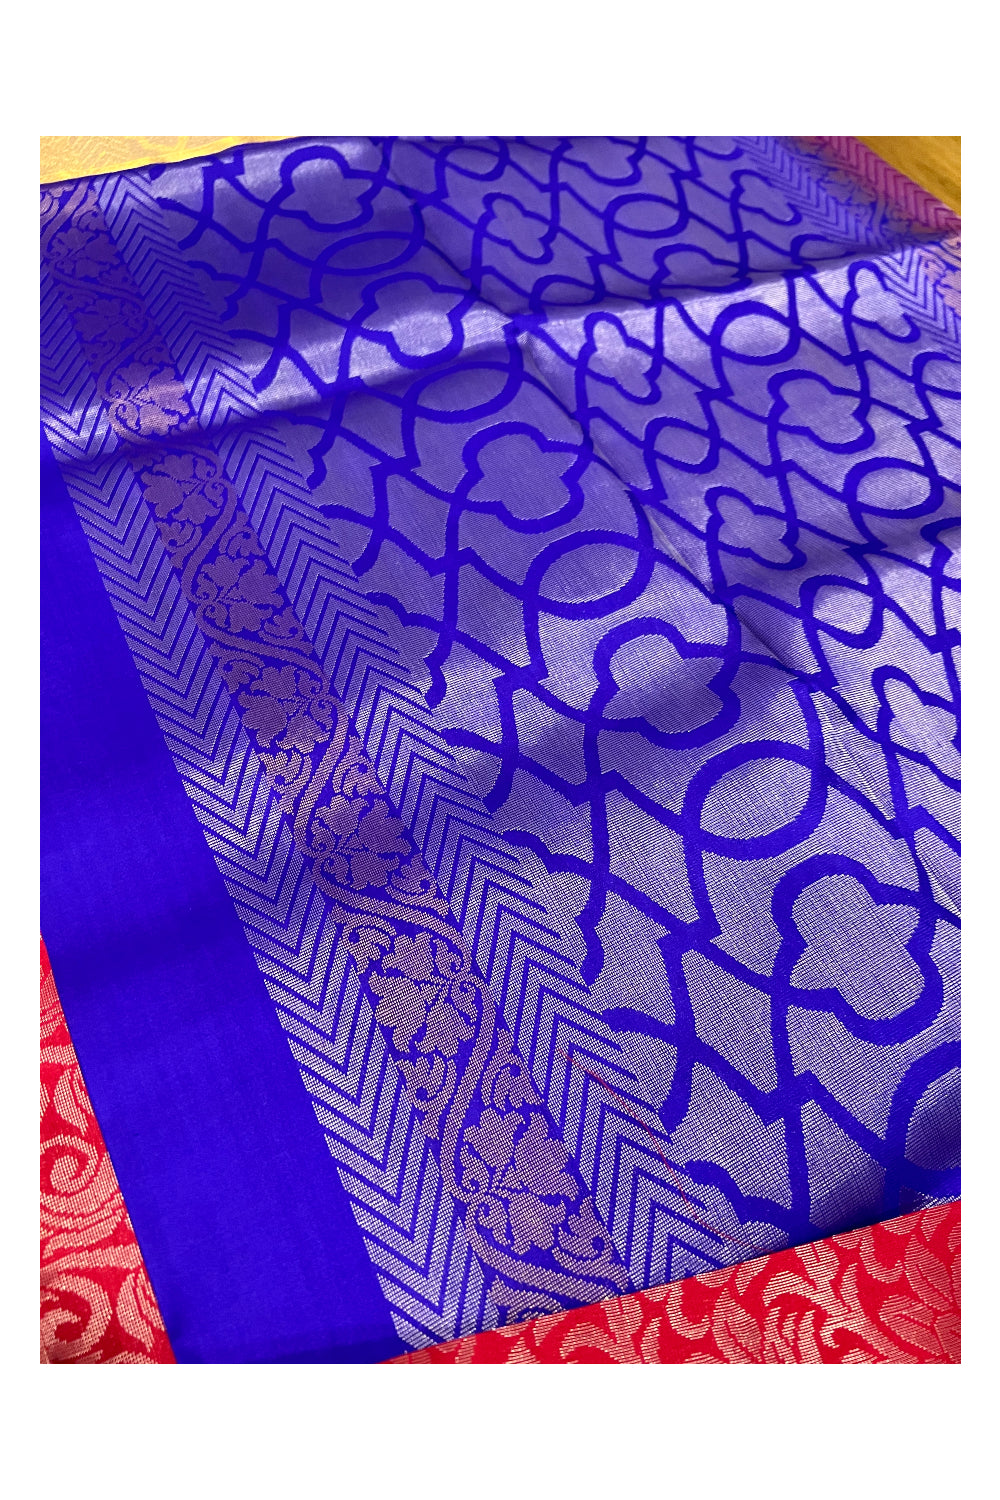 Southloom Handloom Pure Silk Kanchipuram Saree with Floral Work on Red Body and Violet Blouse Piece